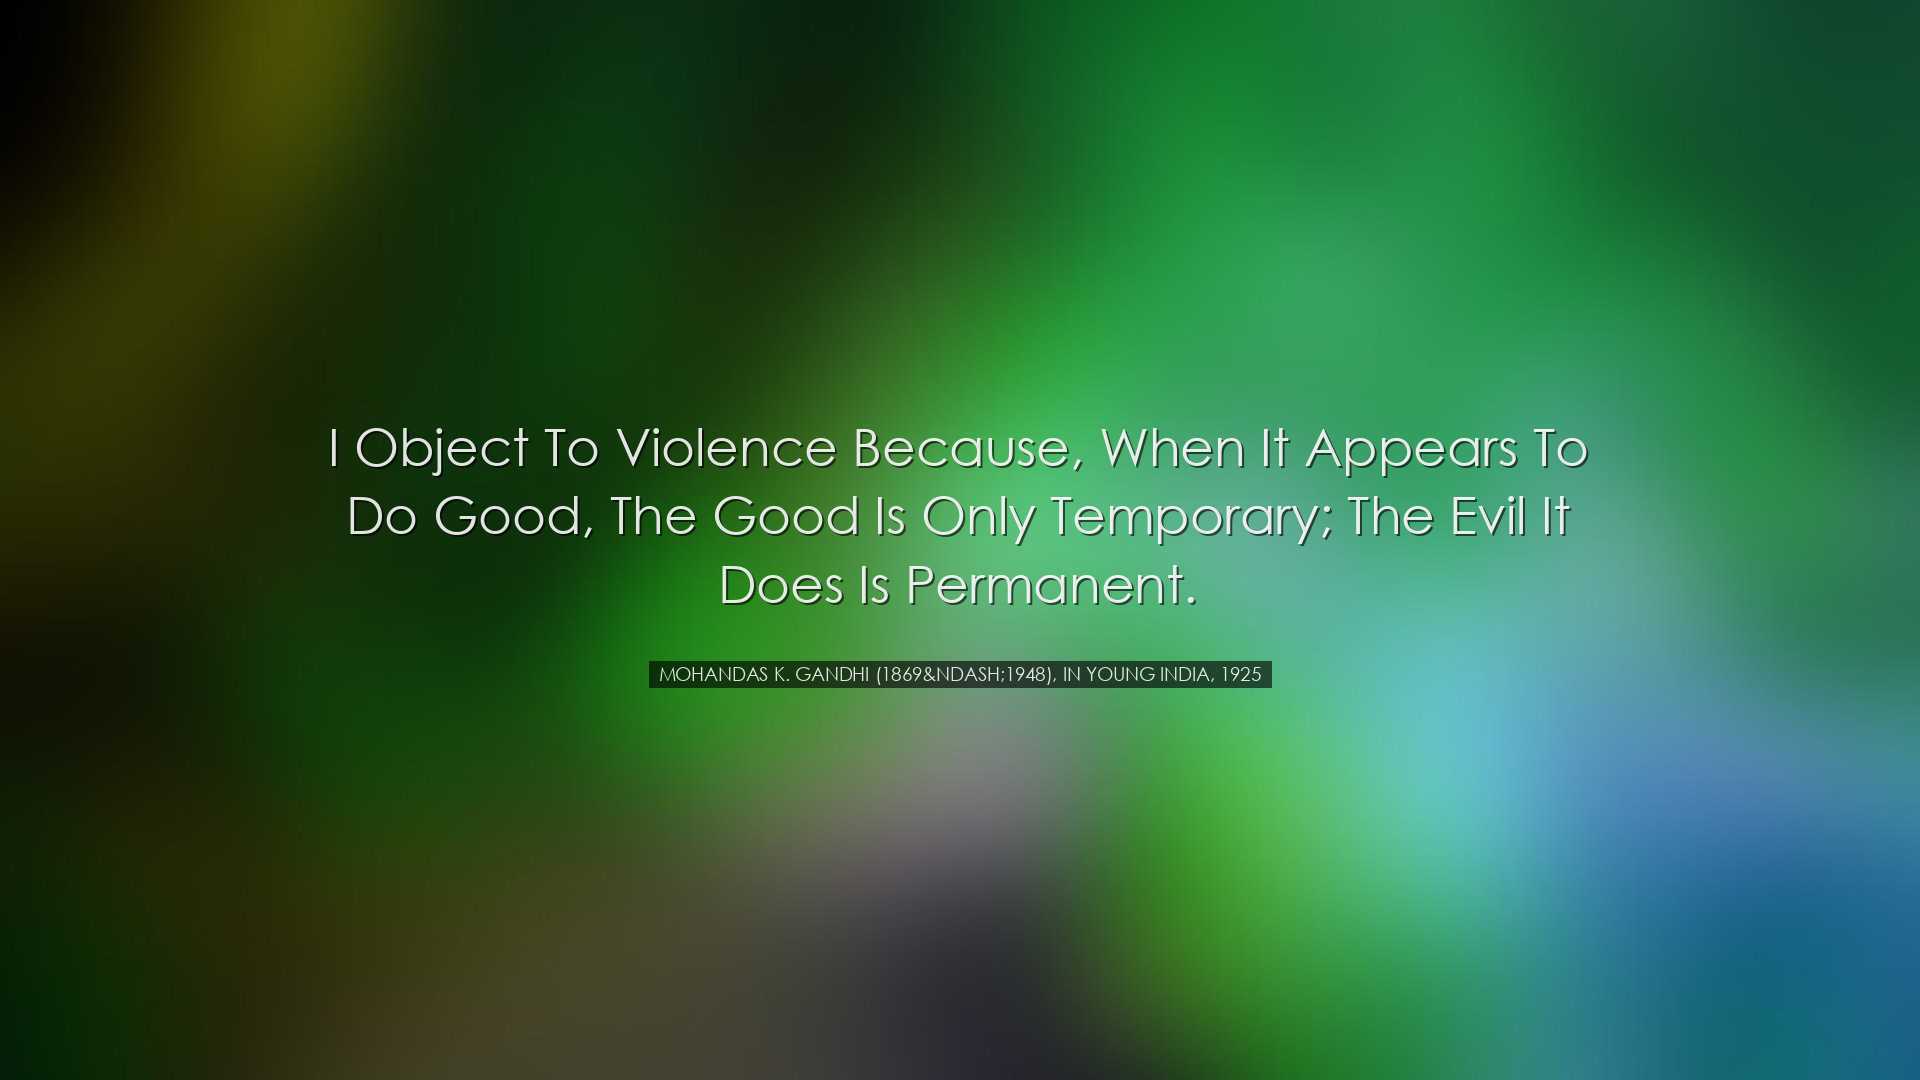 I object to violence because, when it appears to do good, the good